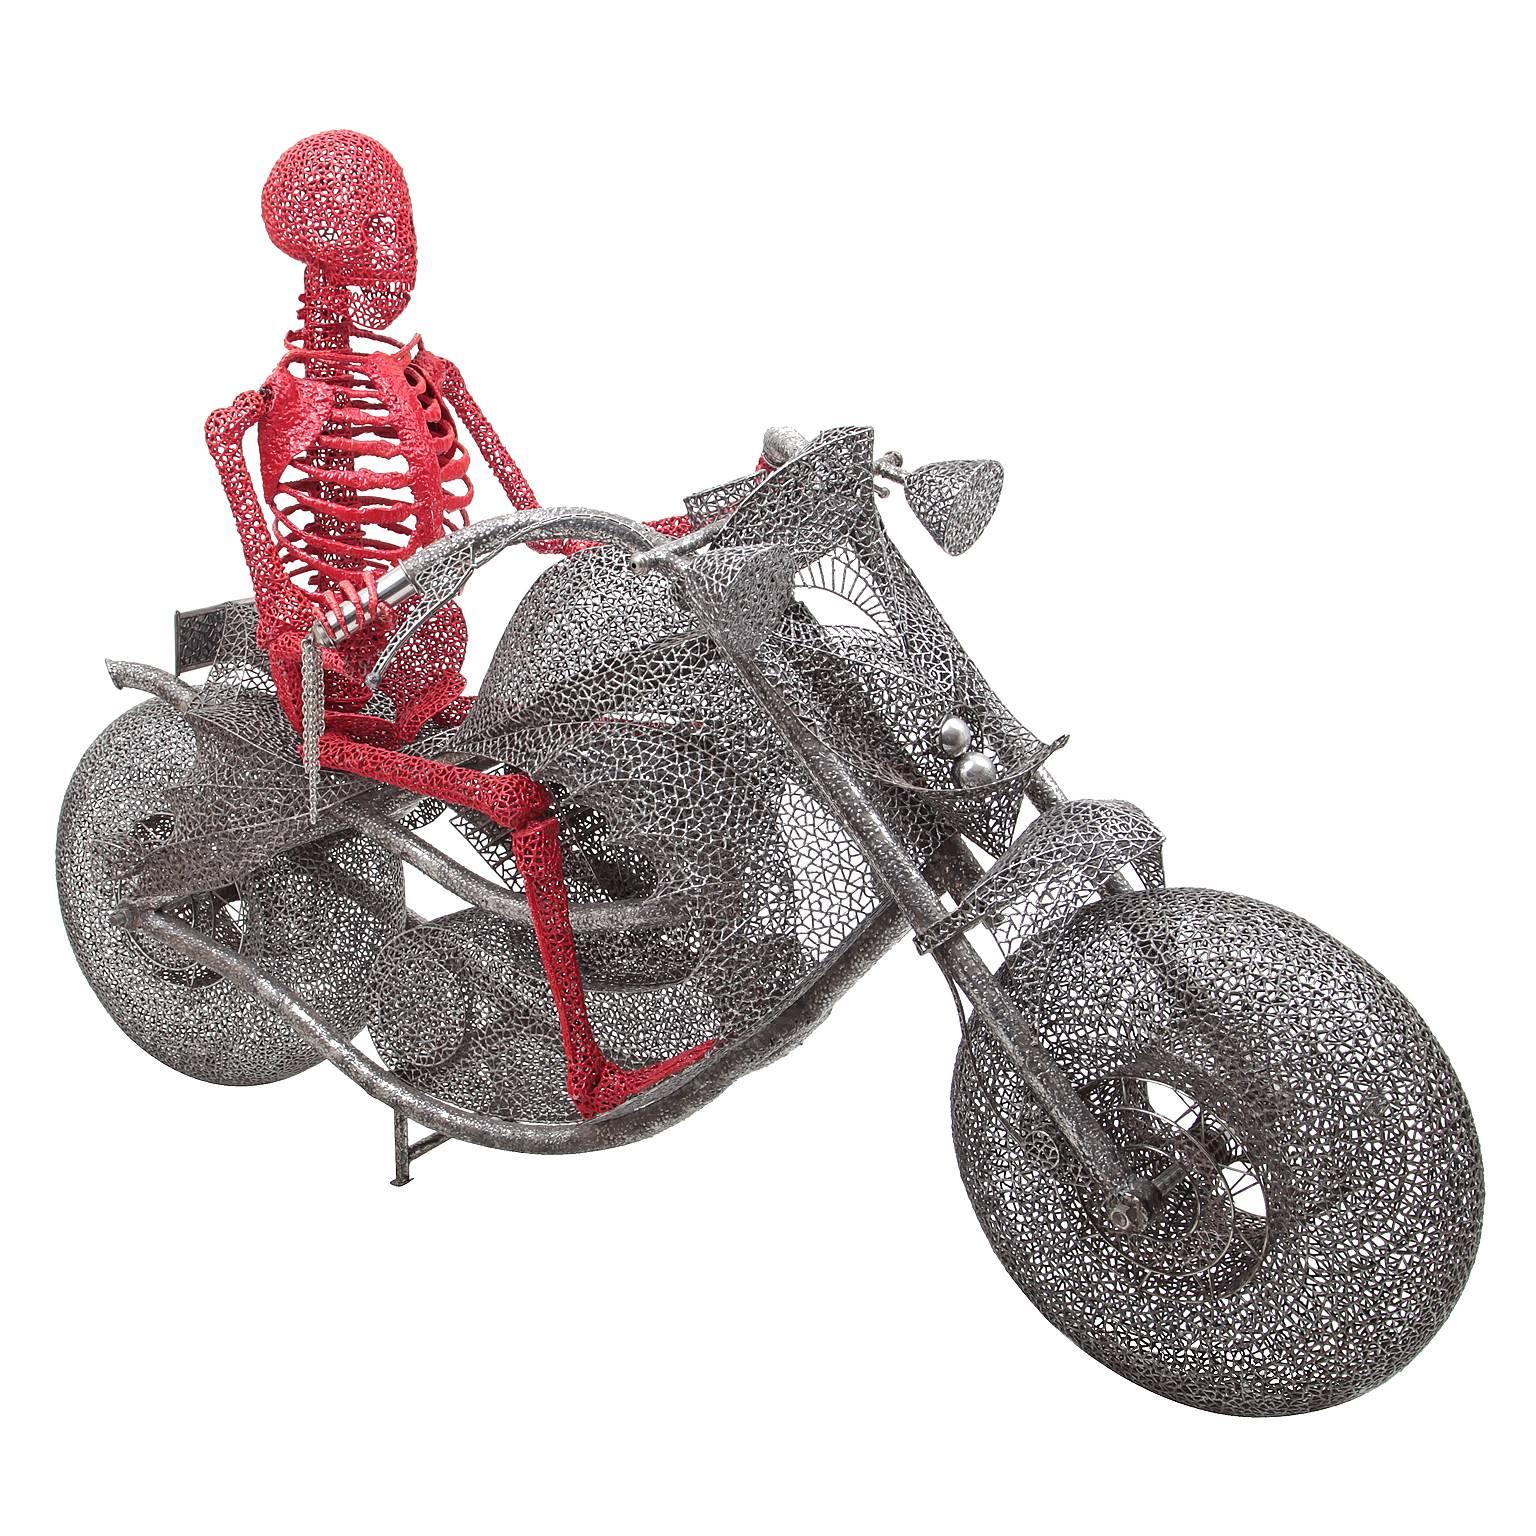 Lifesize "Ghost Rider" by Anacleto Spazzapan, Italy, 2010